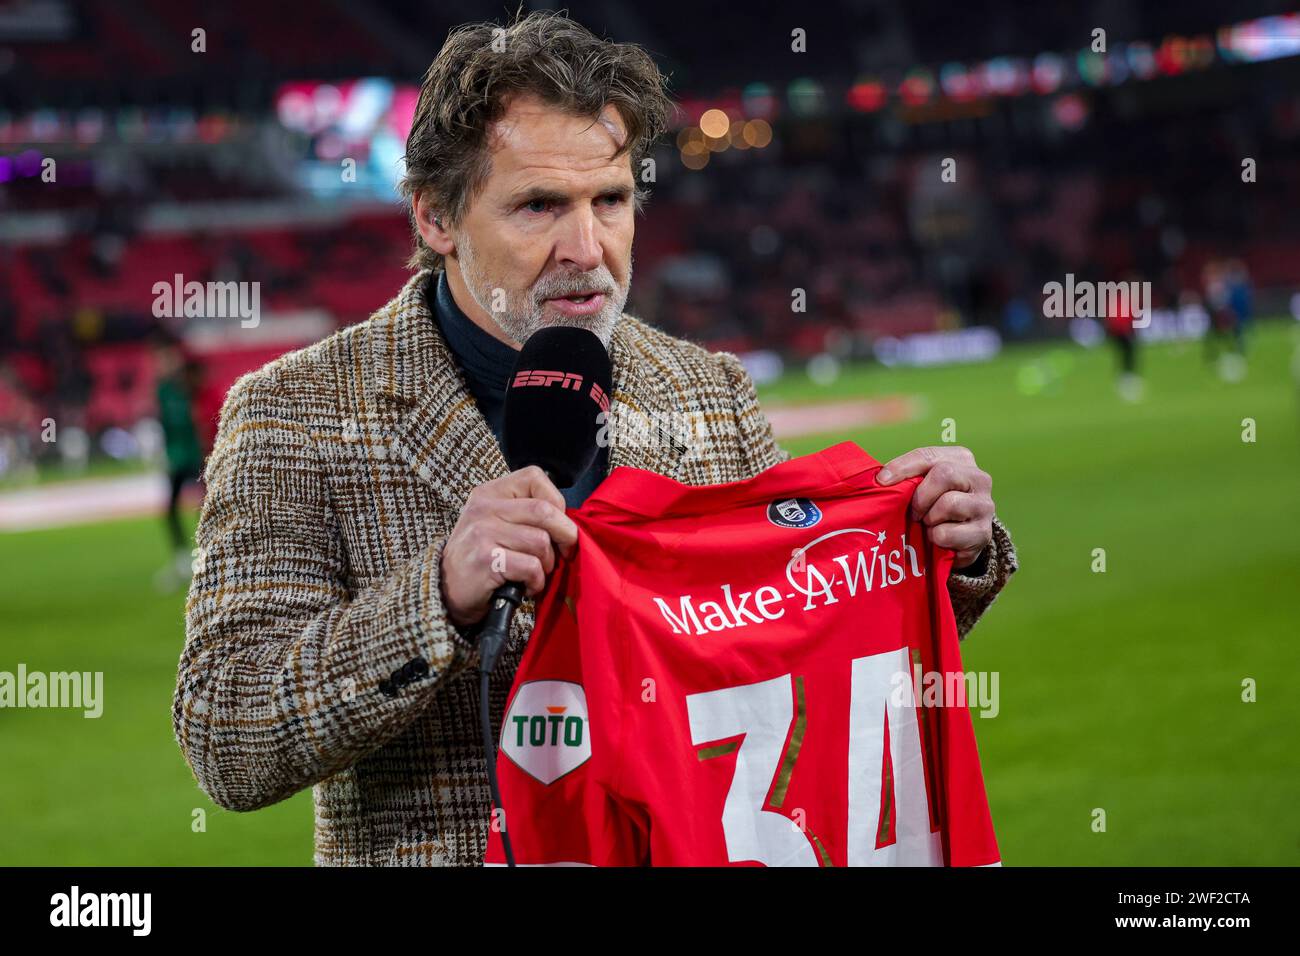 EINDHOVEN, NETHERLANDS - JANUARY 27: Toine van Peperstraten (ESPN) with a special shirt make a wish Speaks with during the Eredivisie match of PSV Ein Stock Photo